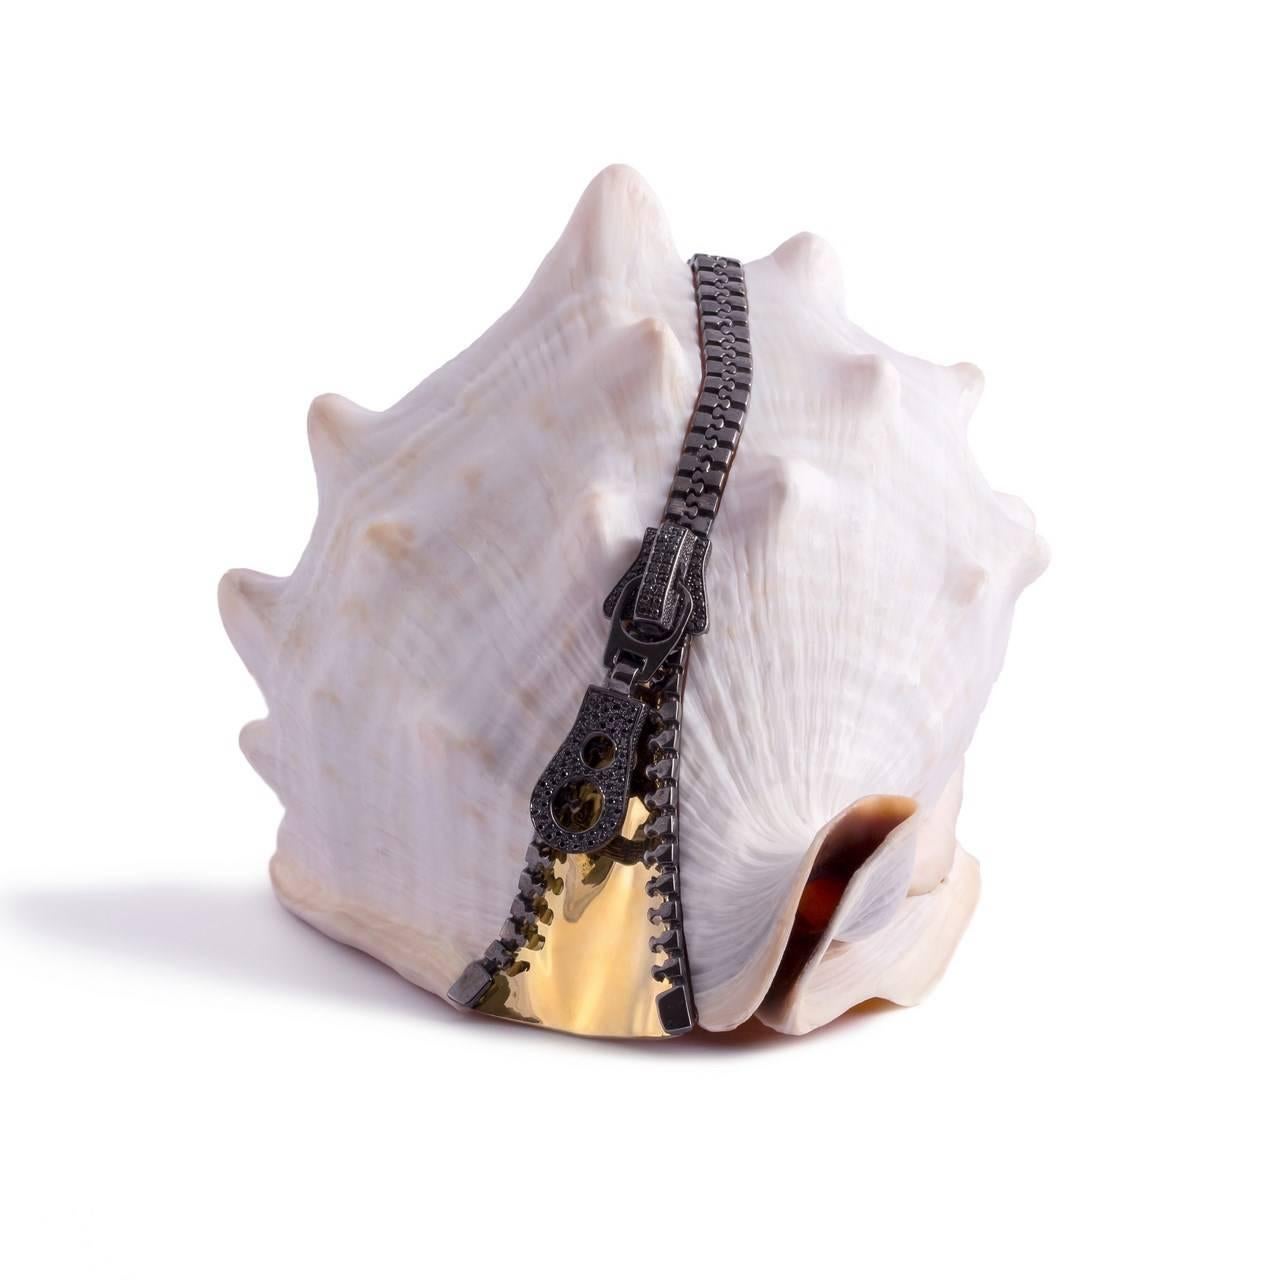 Sterling silver black rhodium plated,14k yellow gold, sardonyx shell hand carved, with black diamonds.
Approx. L 14cm x W 12cm x H 11cm